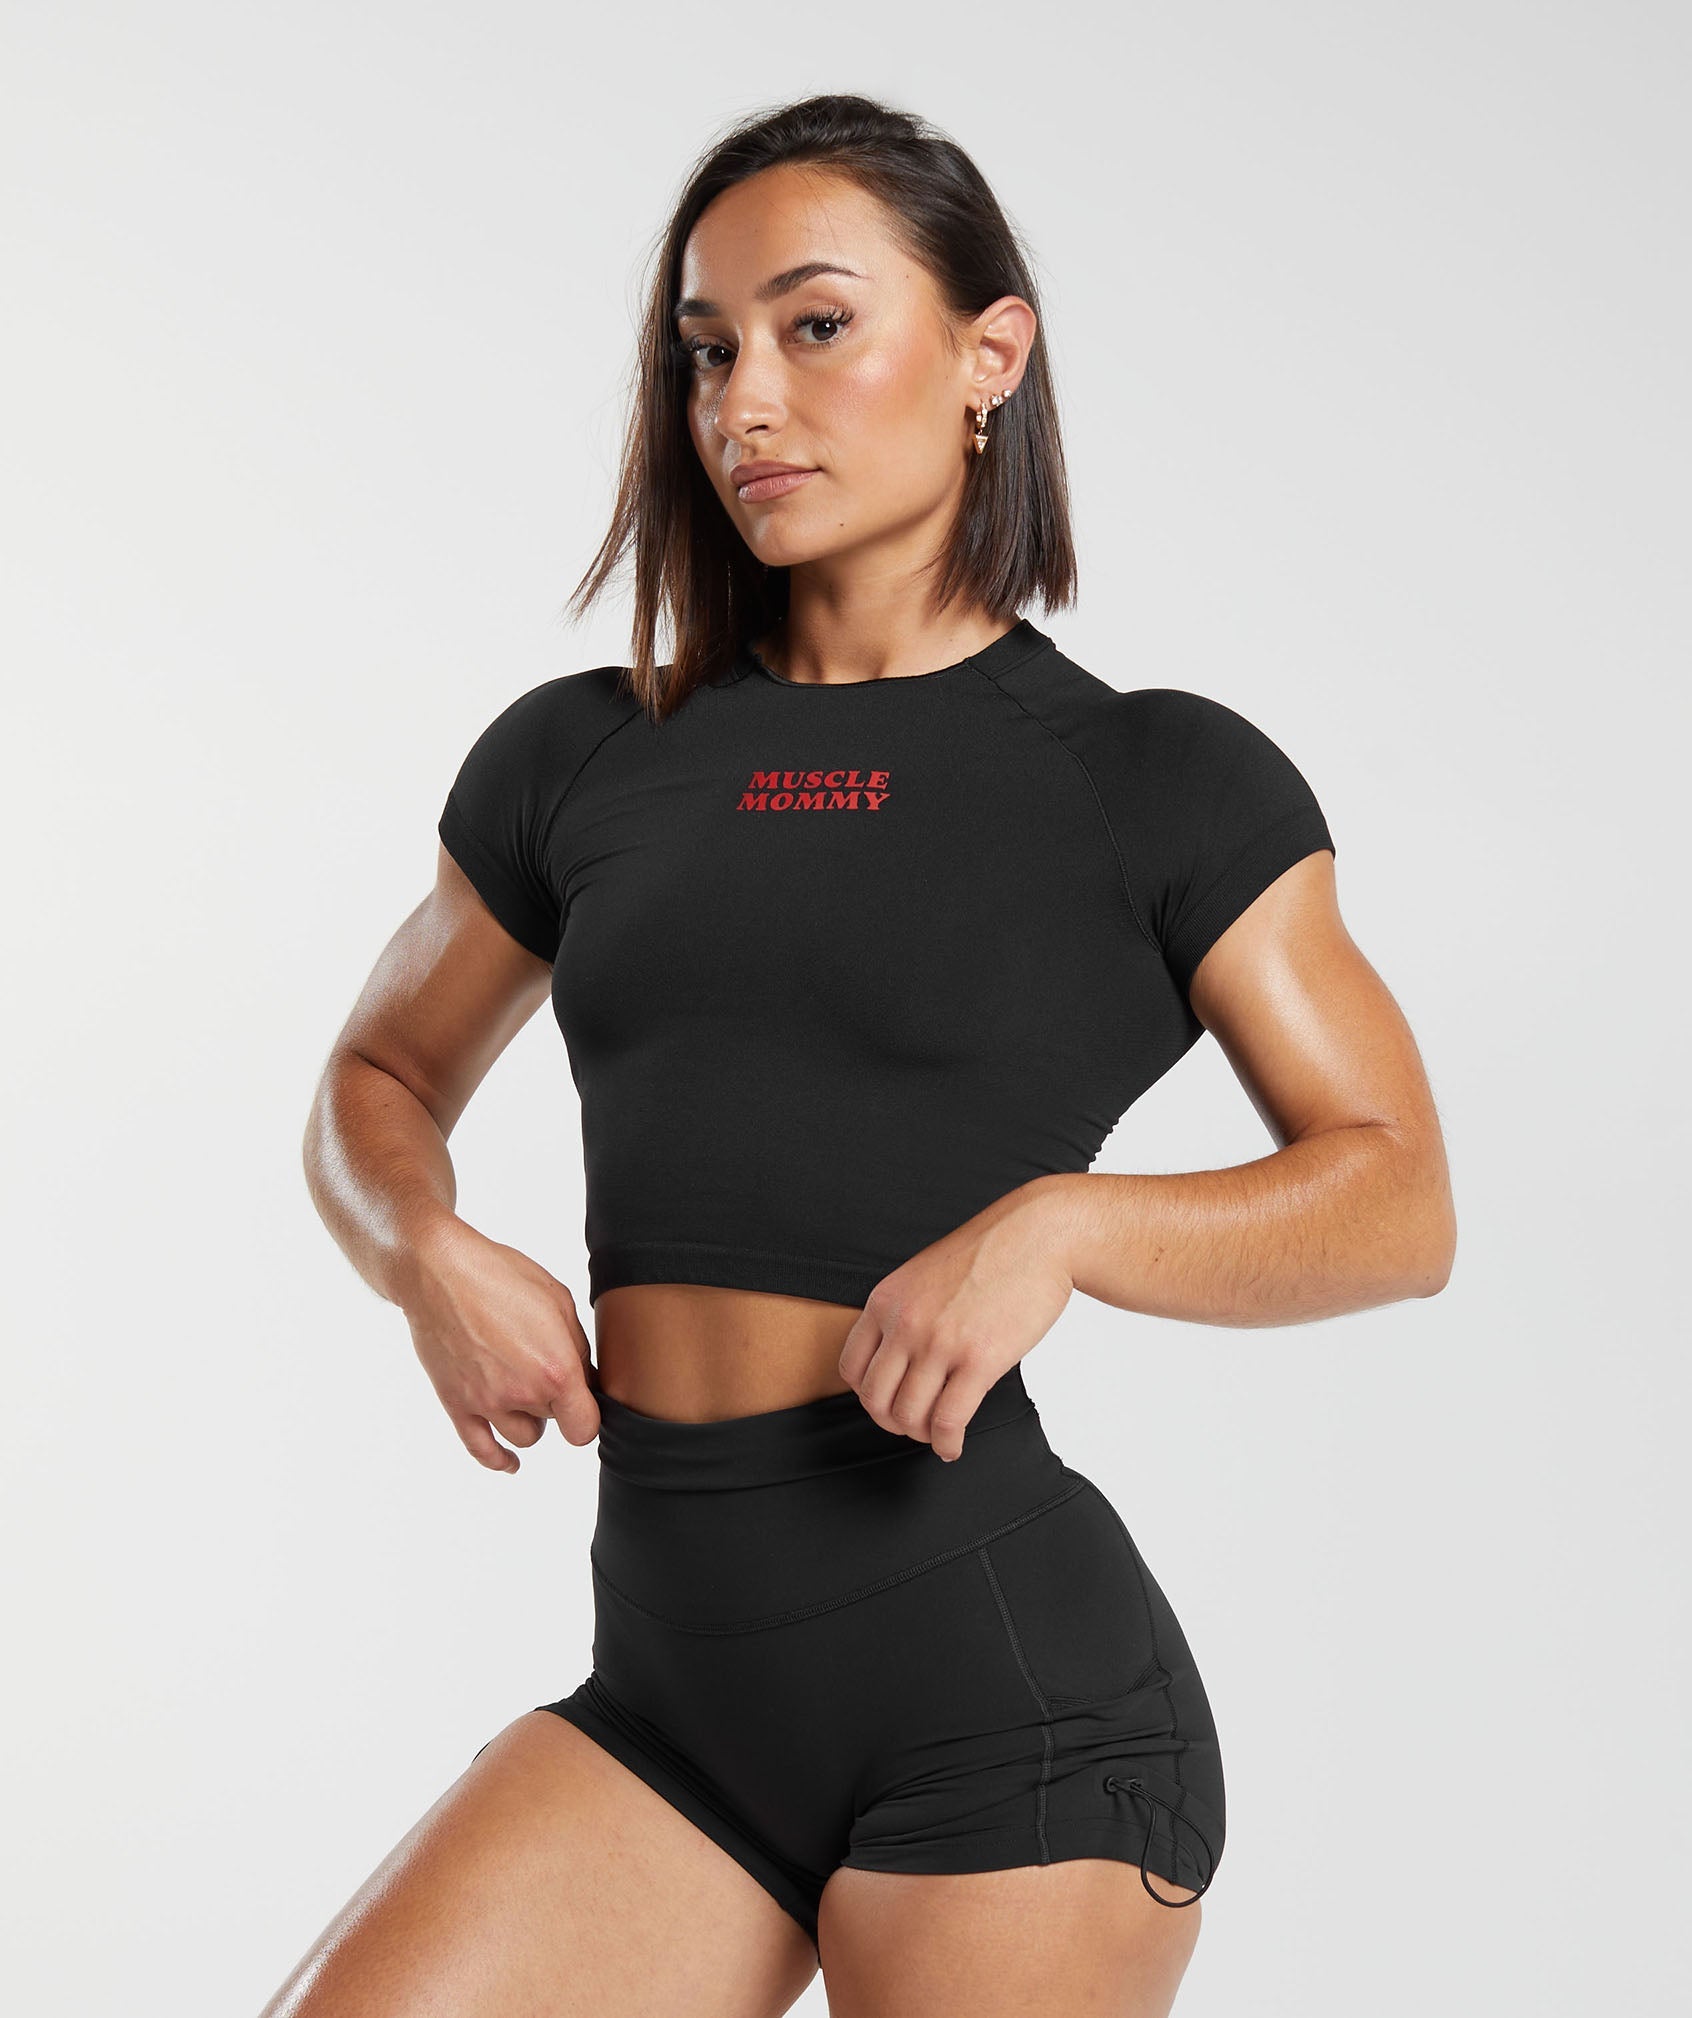 Gymshark Muscle Mommy Graphic Seamless Tee - Black | Gymshark